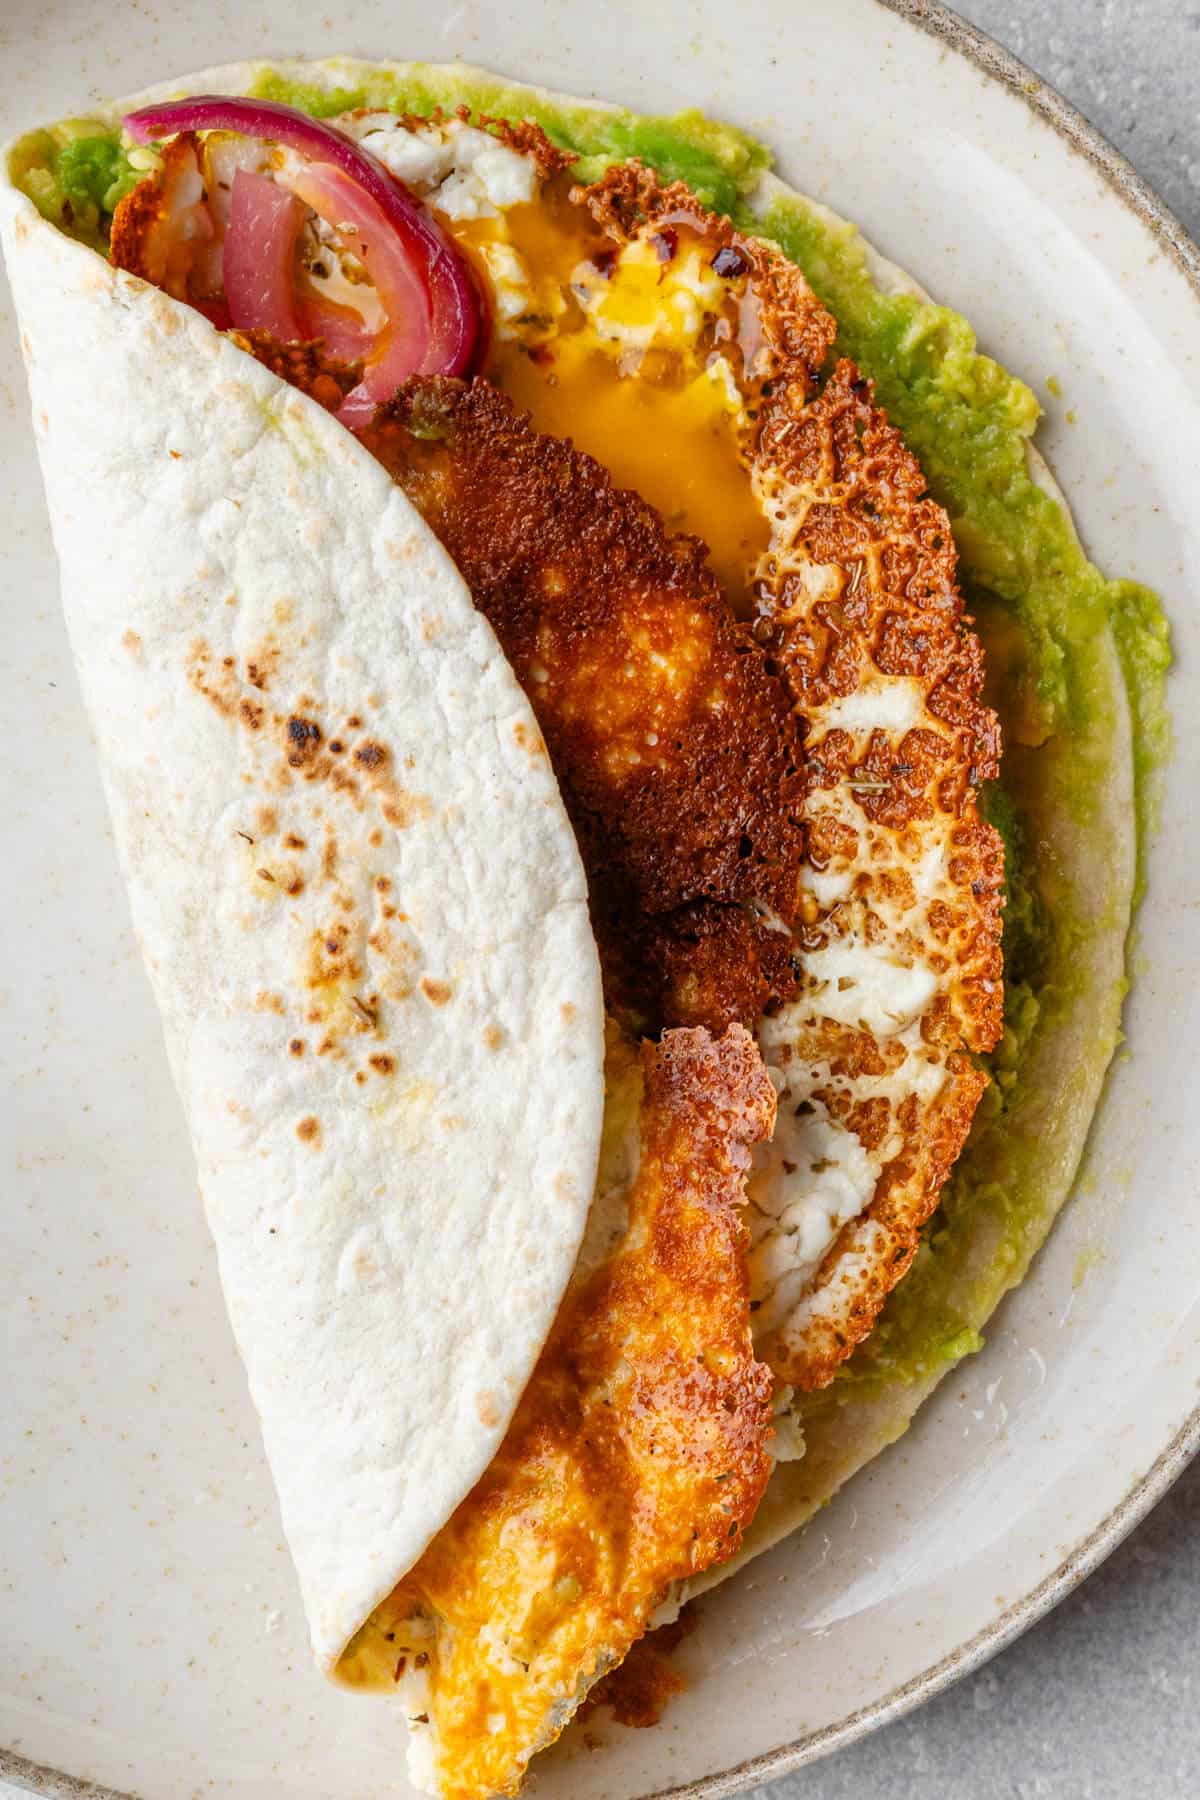 Tortilla folded over to show the layers of avocado and the crispy feta fried egg